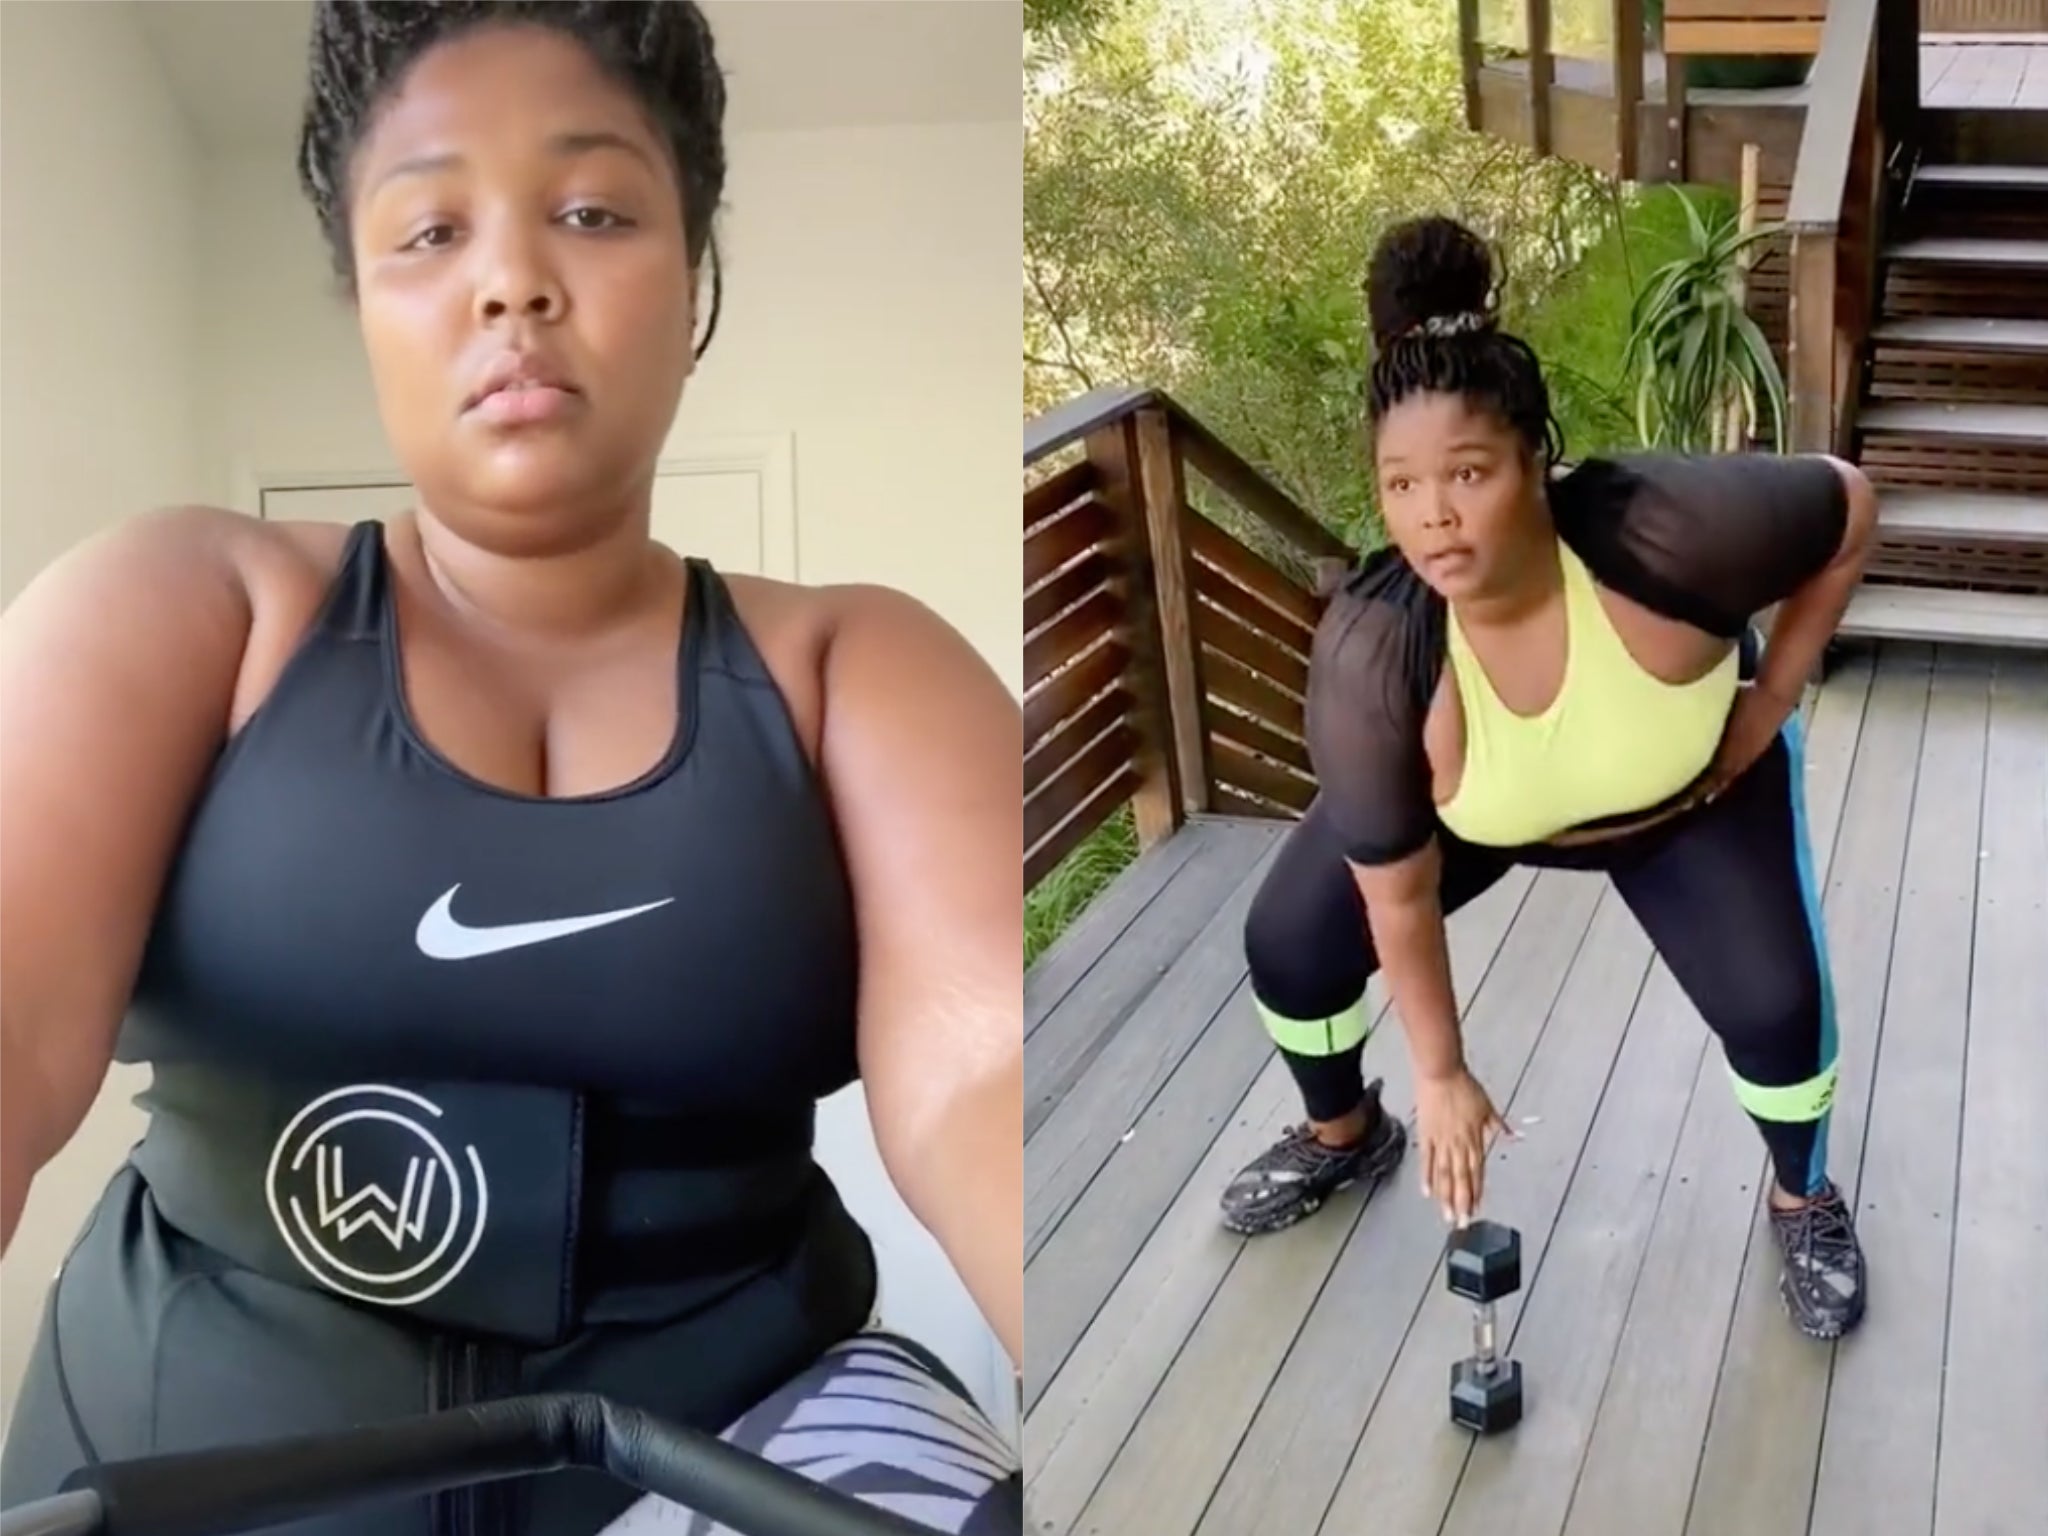 Lizzo tells body-shamers 'I'm not working out to have your ideal body type'